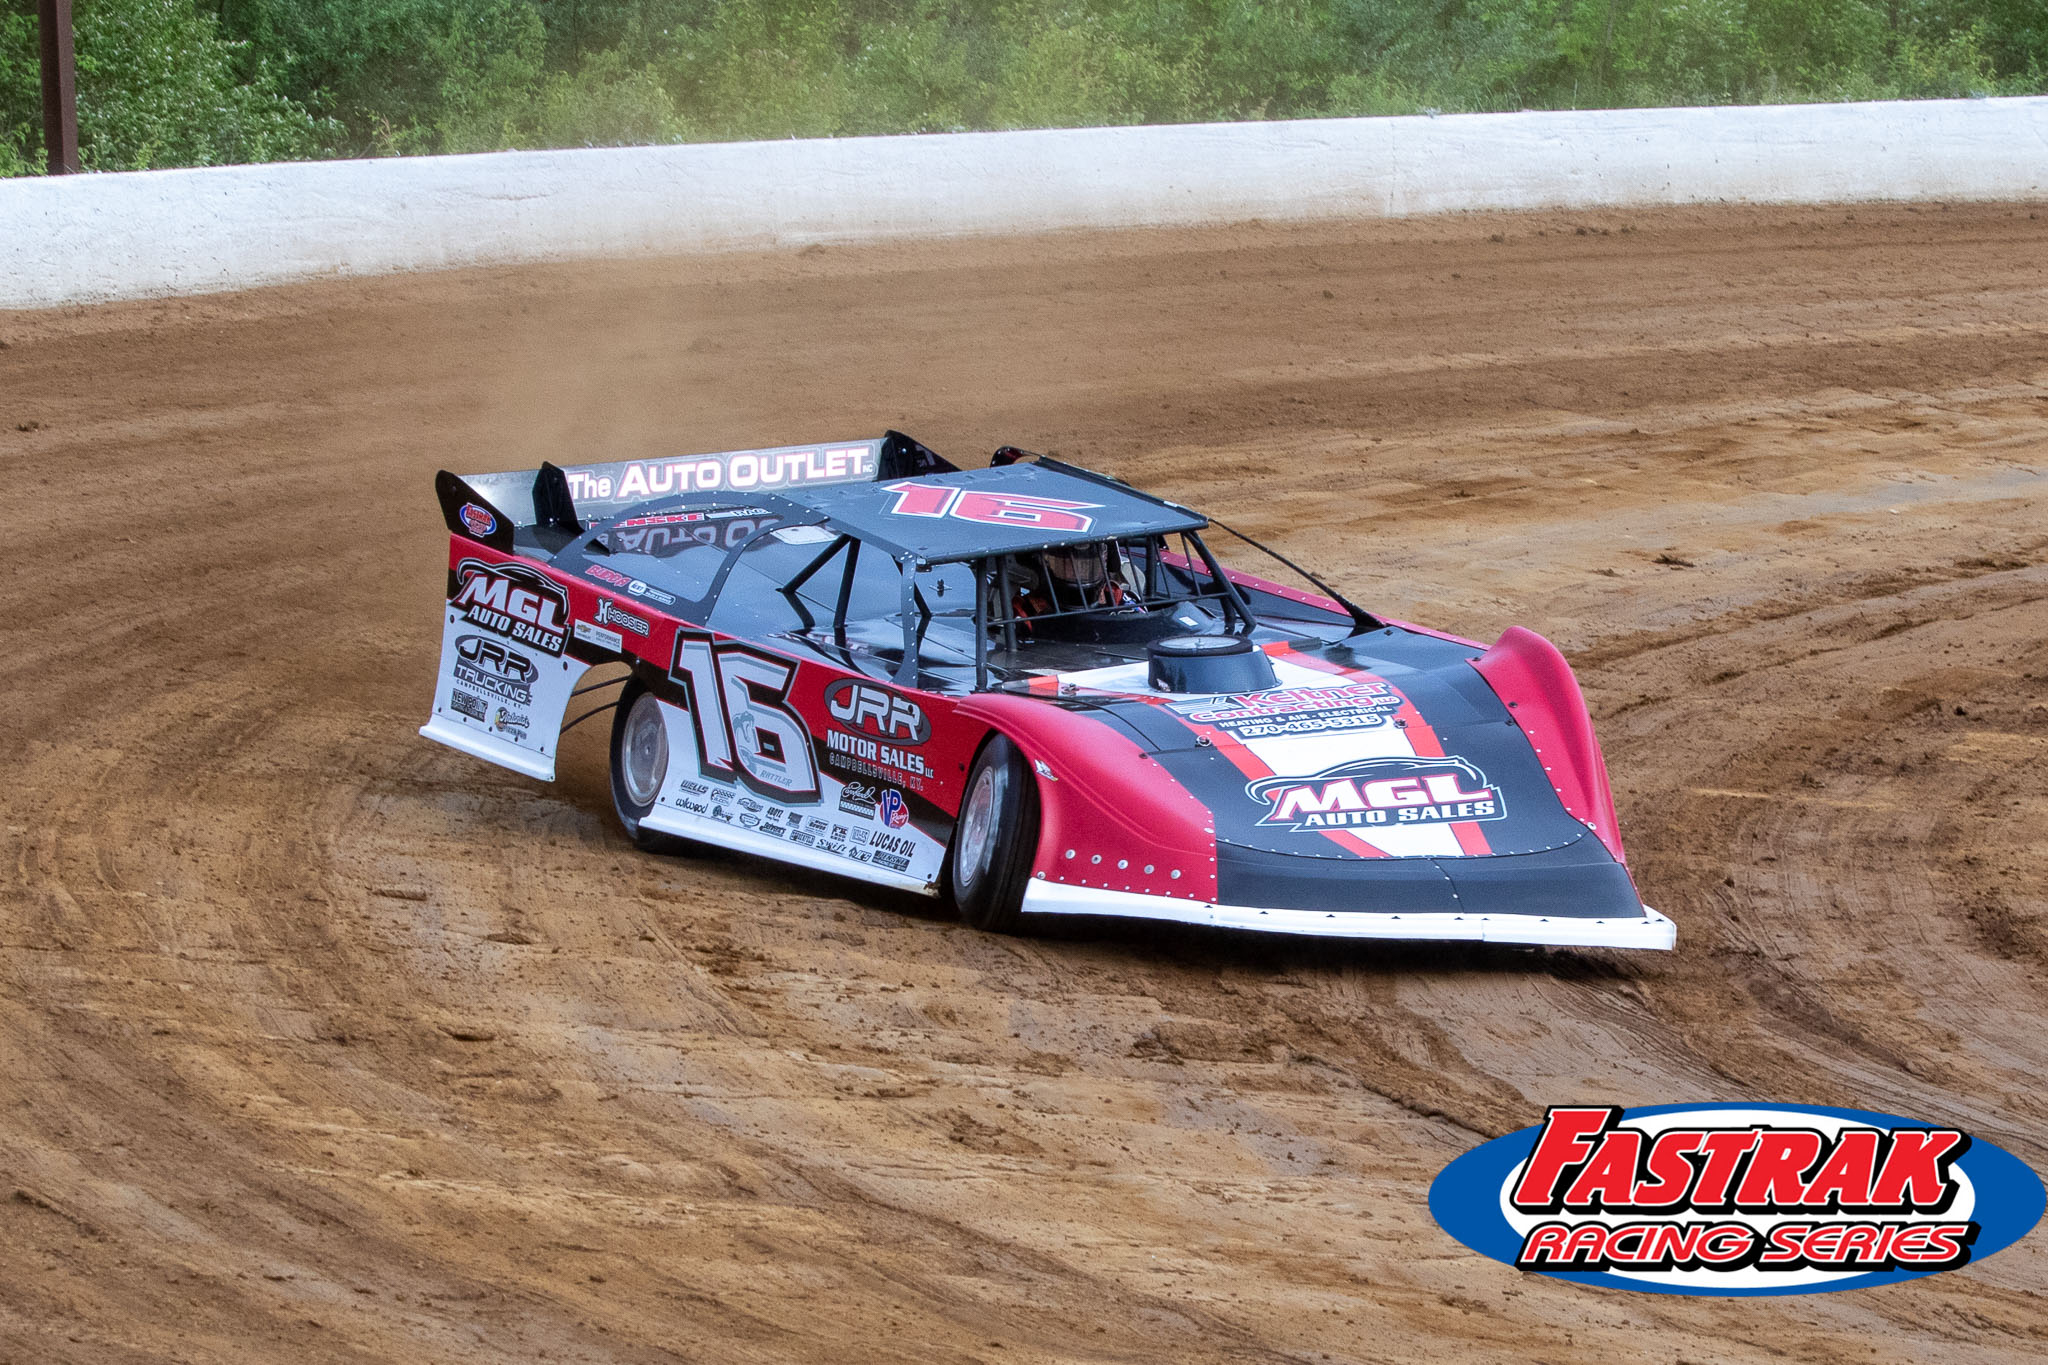 Disqualification Drops Justin Rattliff Out of Runner-Up Richmond Finish